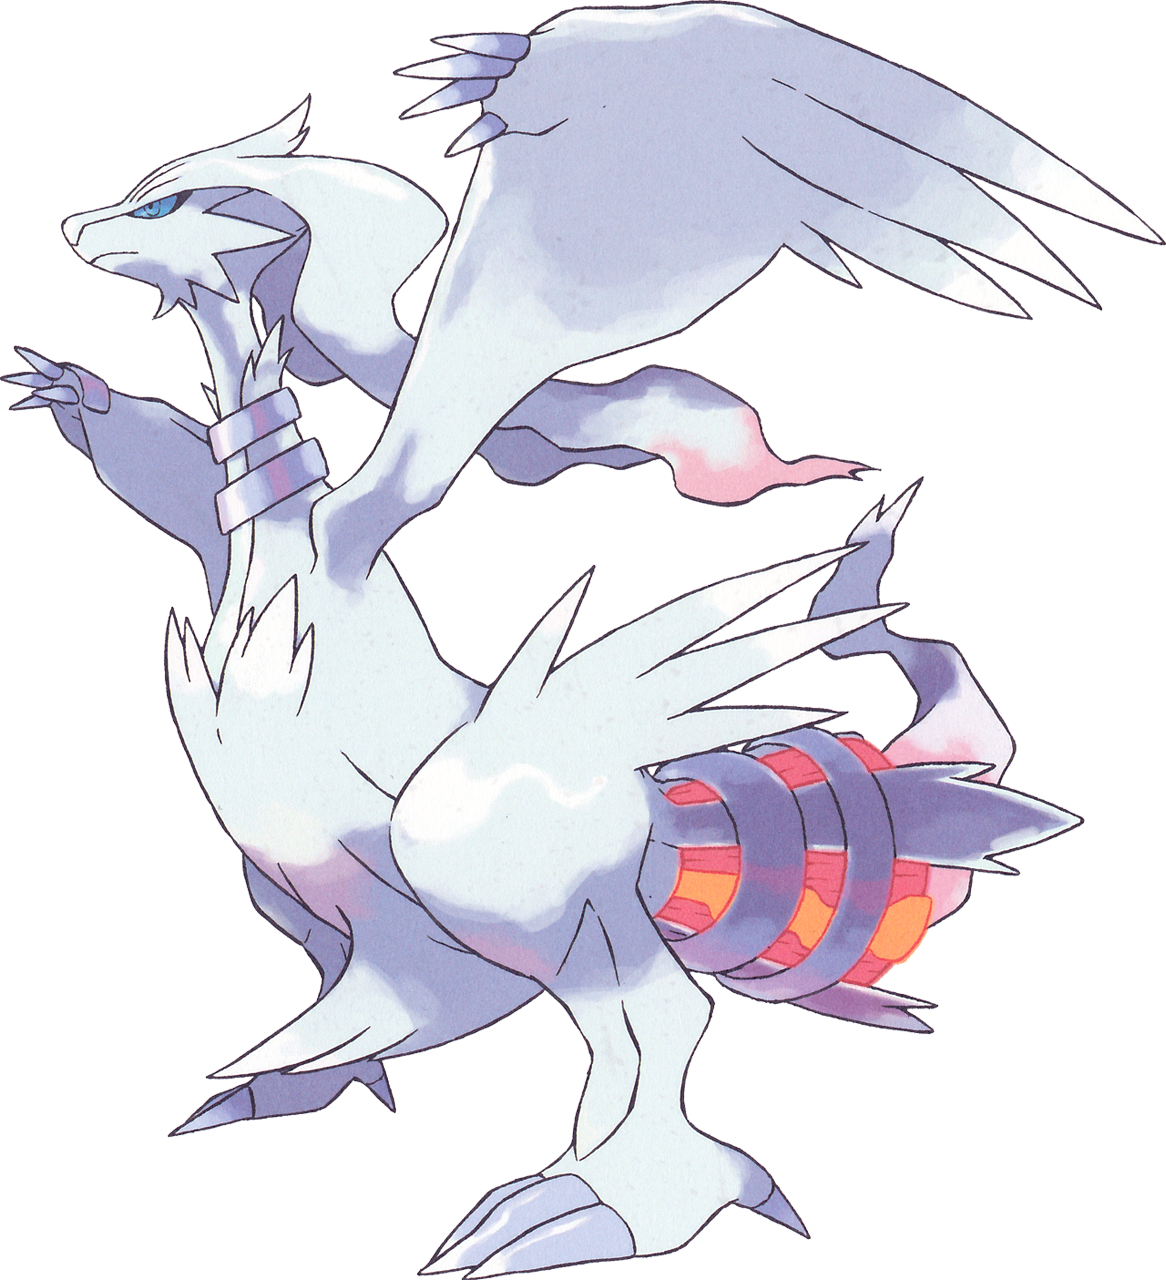 Diantha’s Dragon – A Preliminary Analysis of Reshiram in VGC 2016